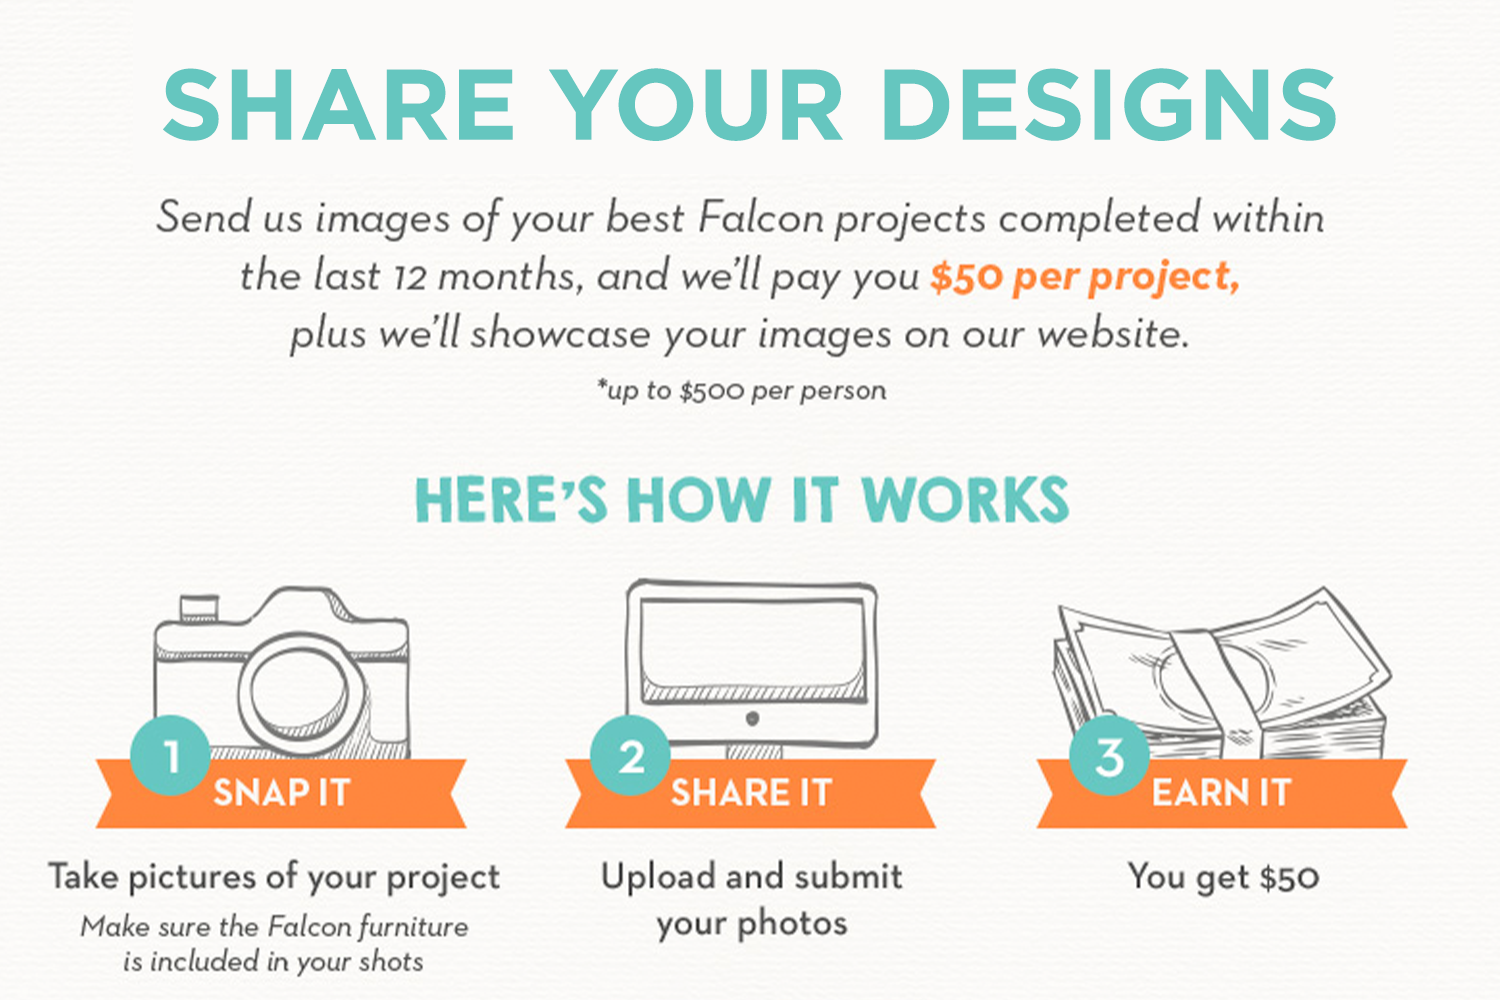 Share Your Designs with Falcon